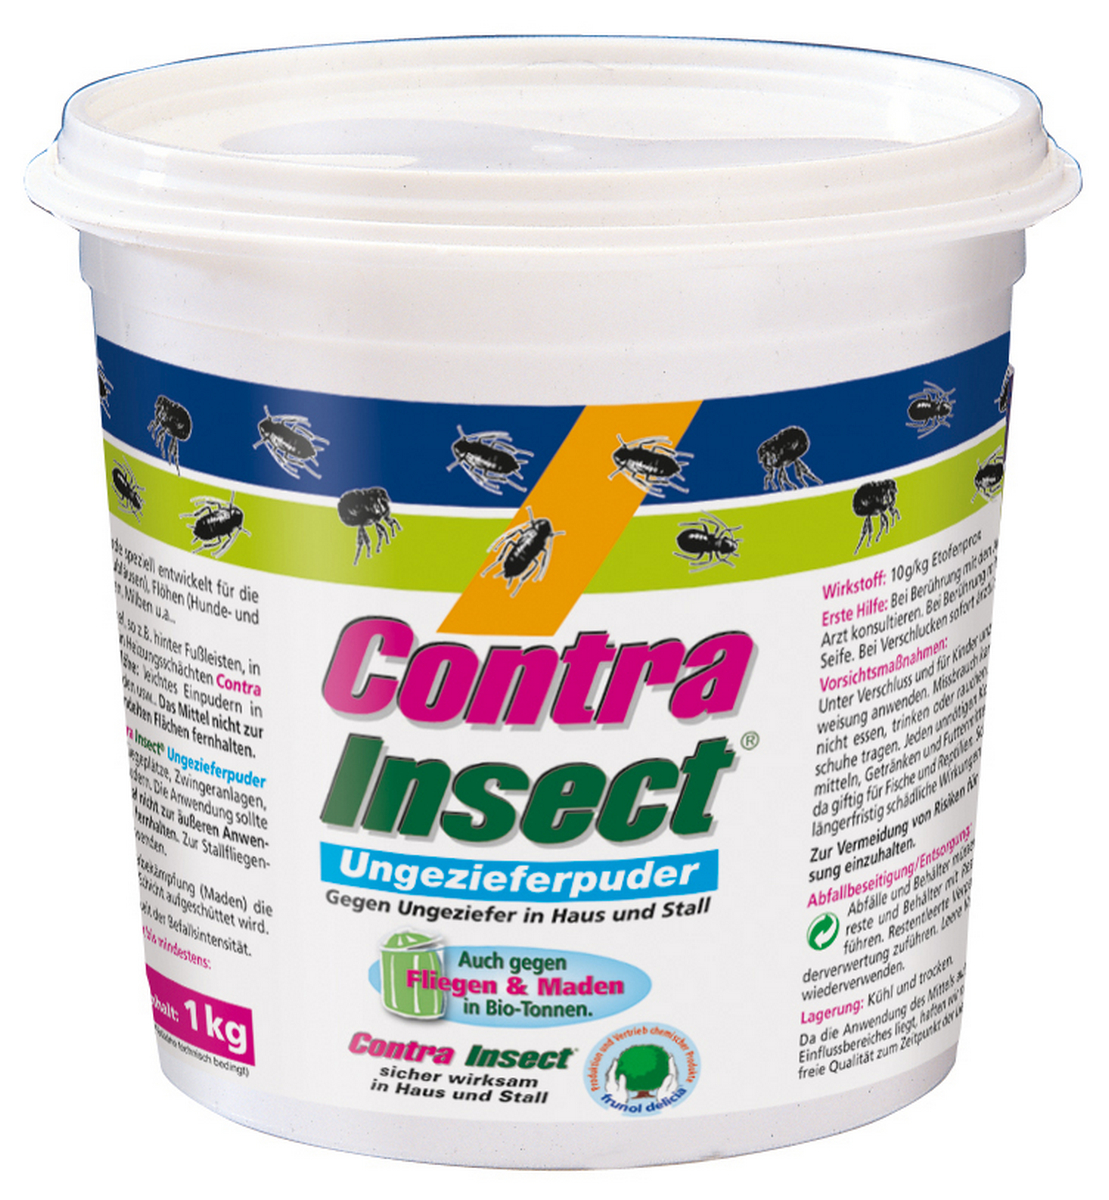 BEISELEN GMBH Contra-Insect Ungeziefer-Puder 1 kg Frunol delicia